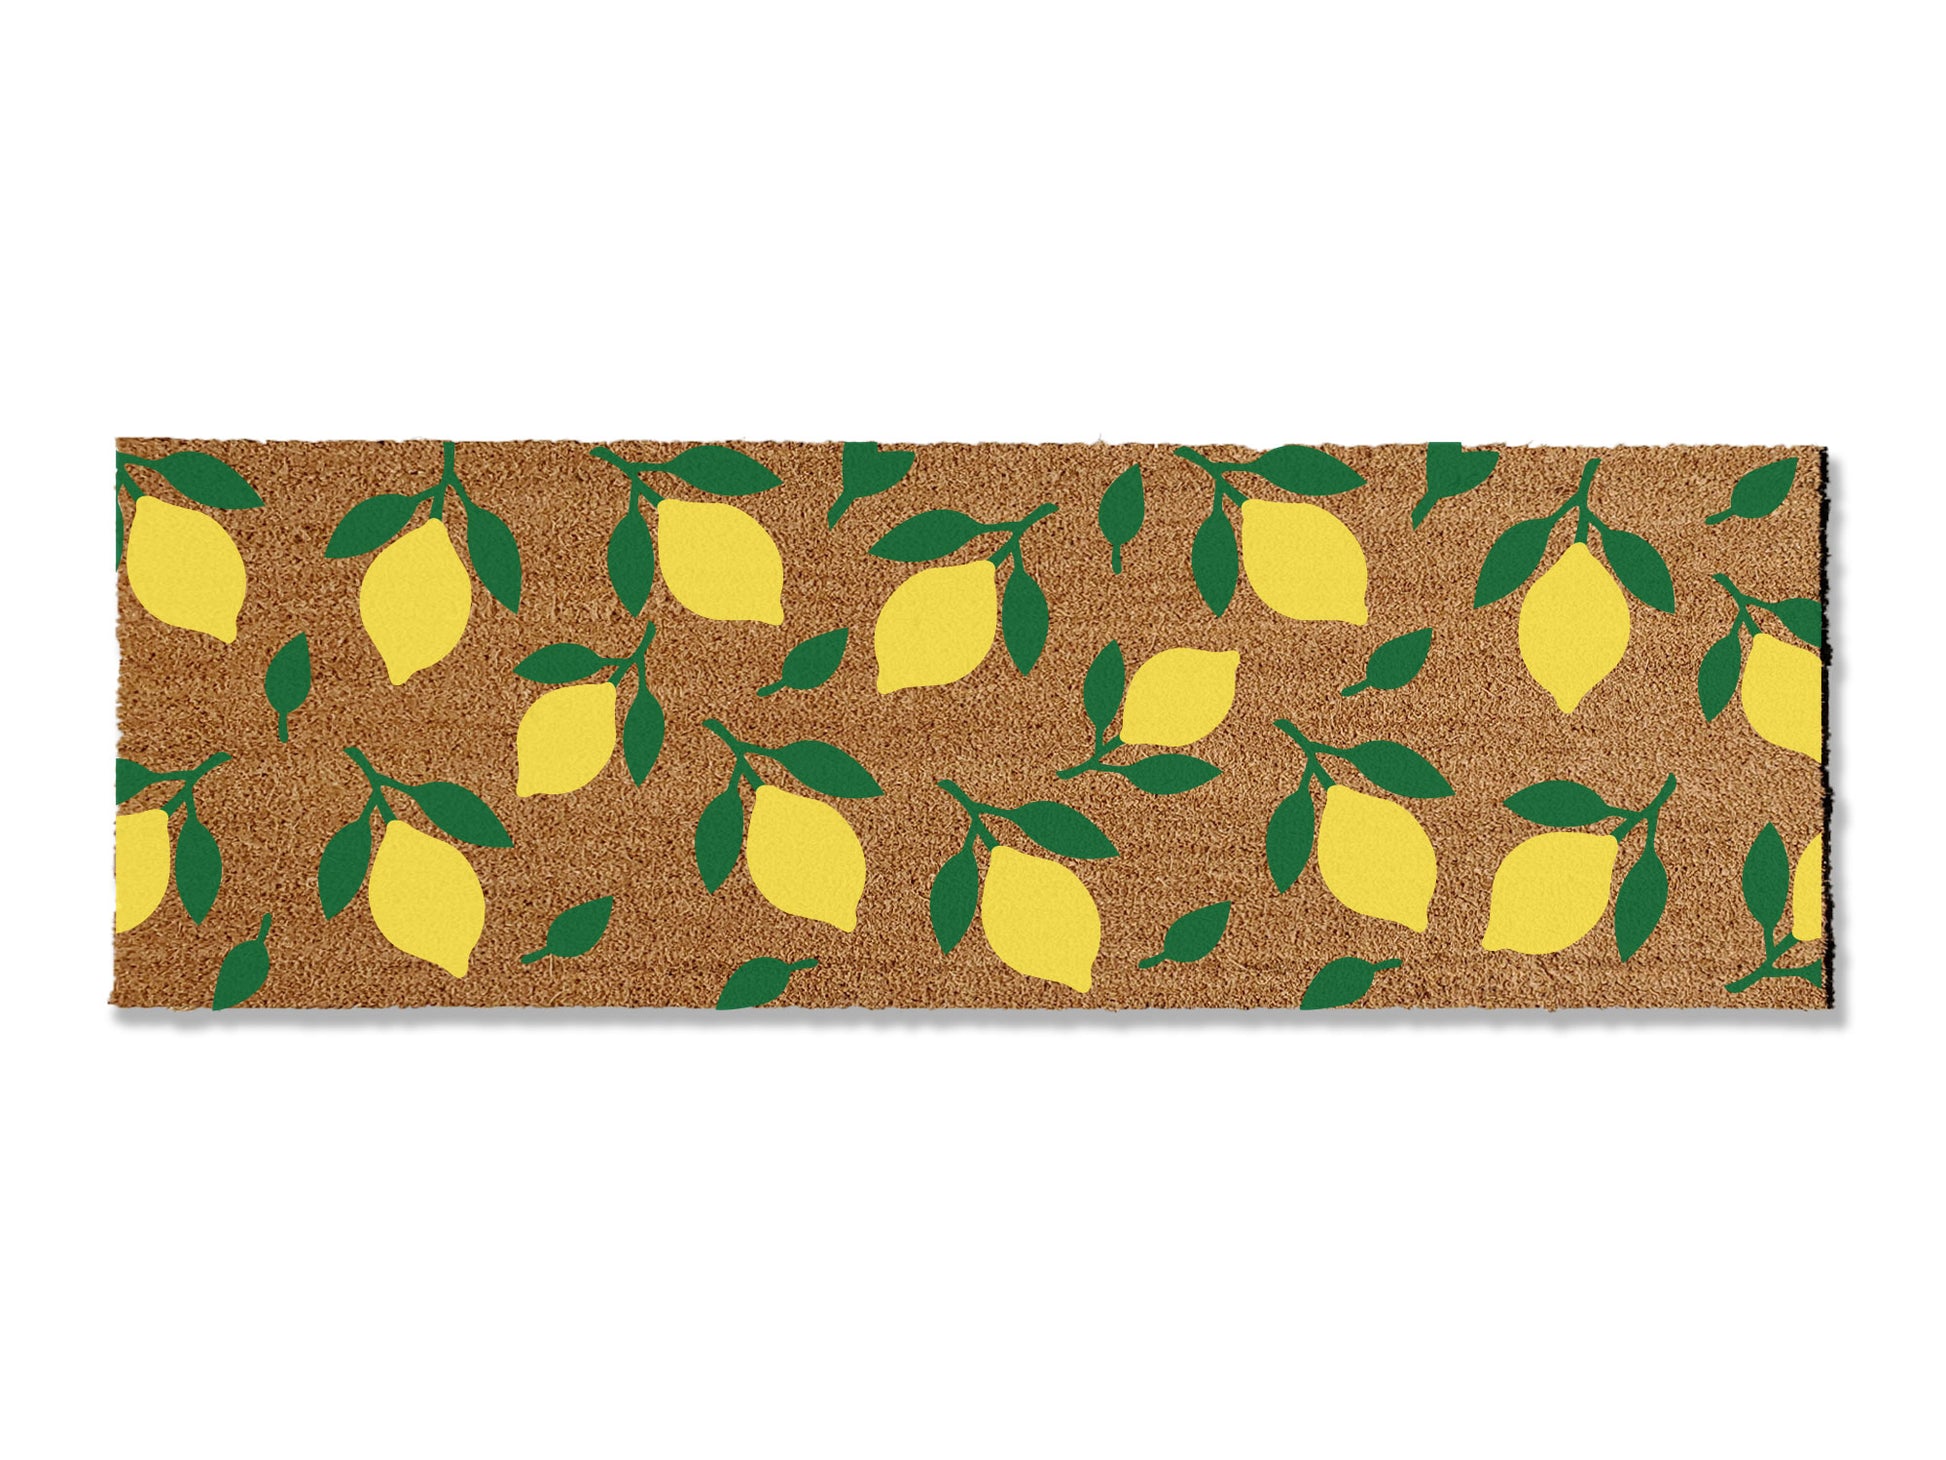 Elevate your entrance with our coir doormat featuring an all-over lemon pattern, perfect for summer or a Tuscan-style home. Available in multiple sizes, this charming mat not only adds a refreshing touch to your doorstep but is also highly effective at trapping dirt.